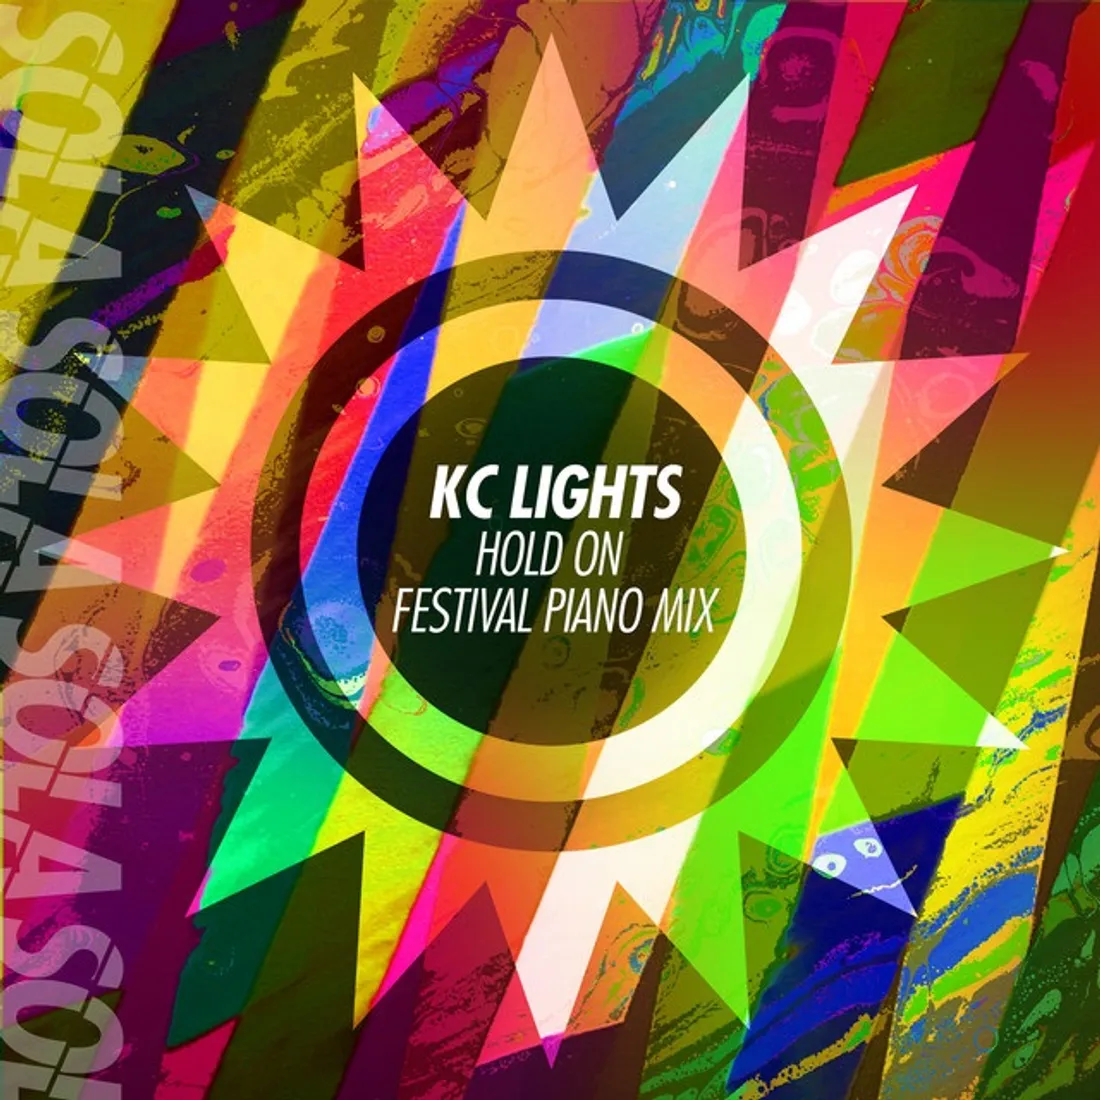 Kc Lights - Hold On (Festival Piano Mix)